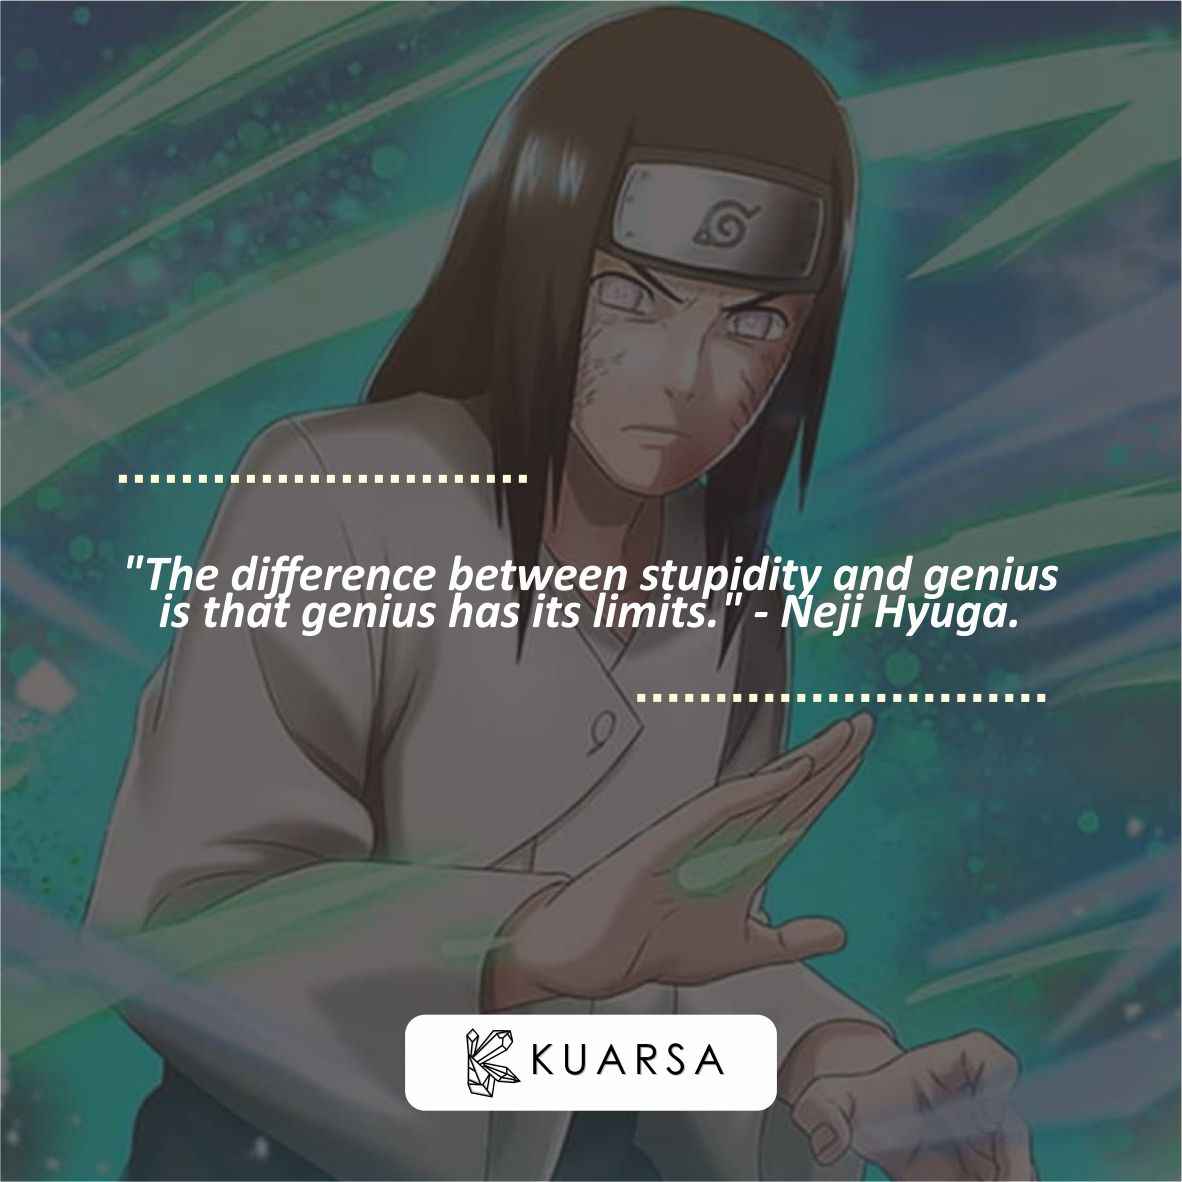 +710 Best Quotes from All Characters in the Anime Naruto (English Language)